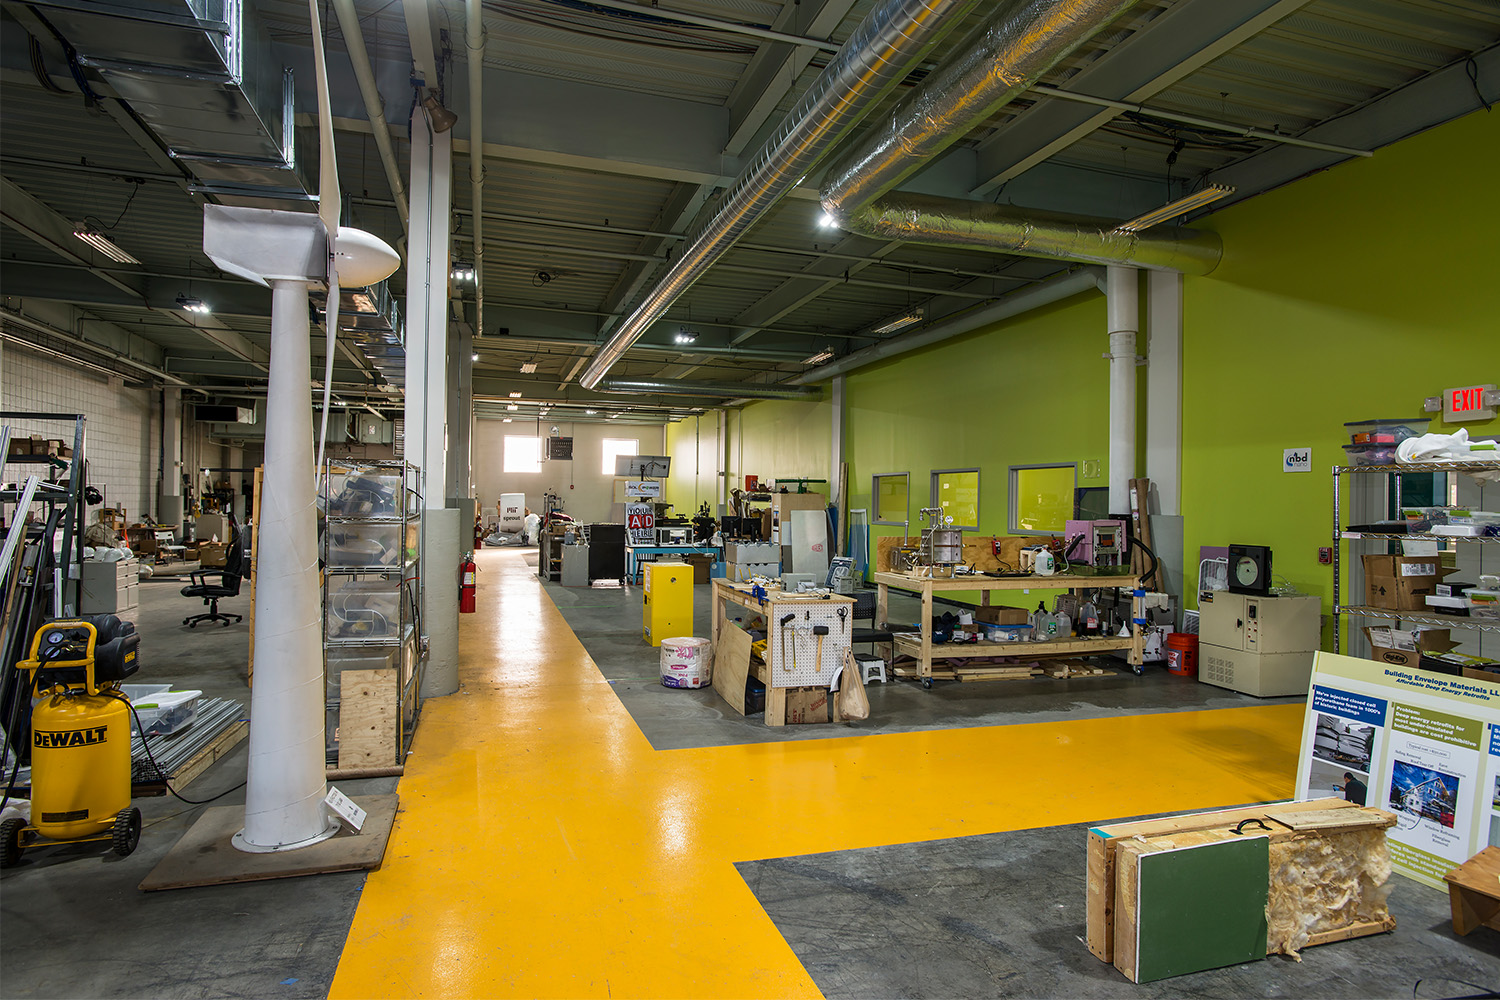 Laboratory with yellow pathway painted on floor, and exposed metal beams on ceiling 